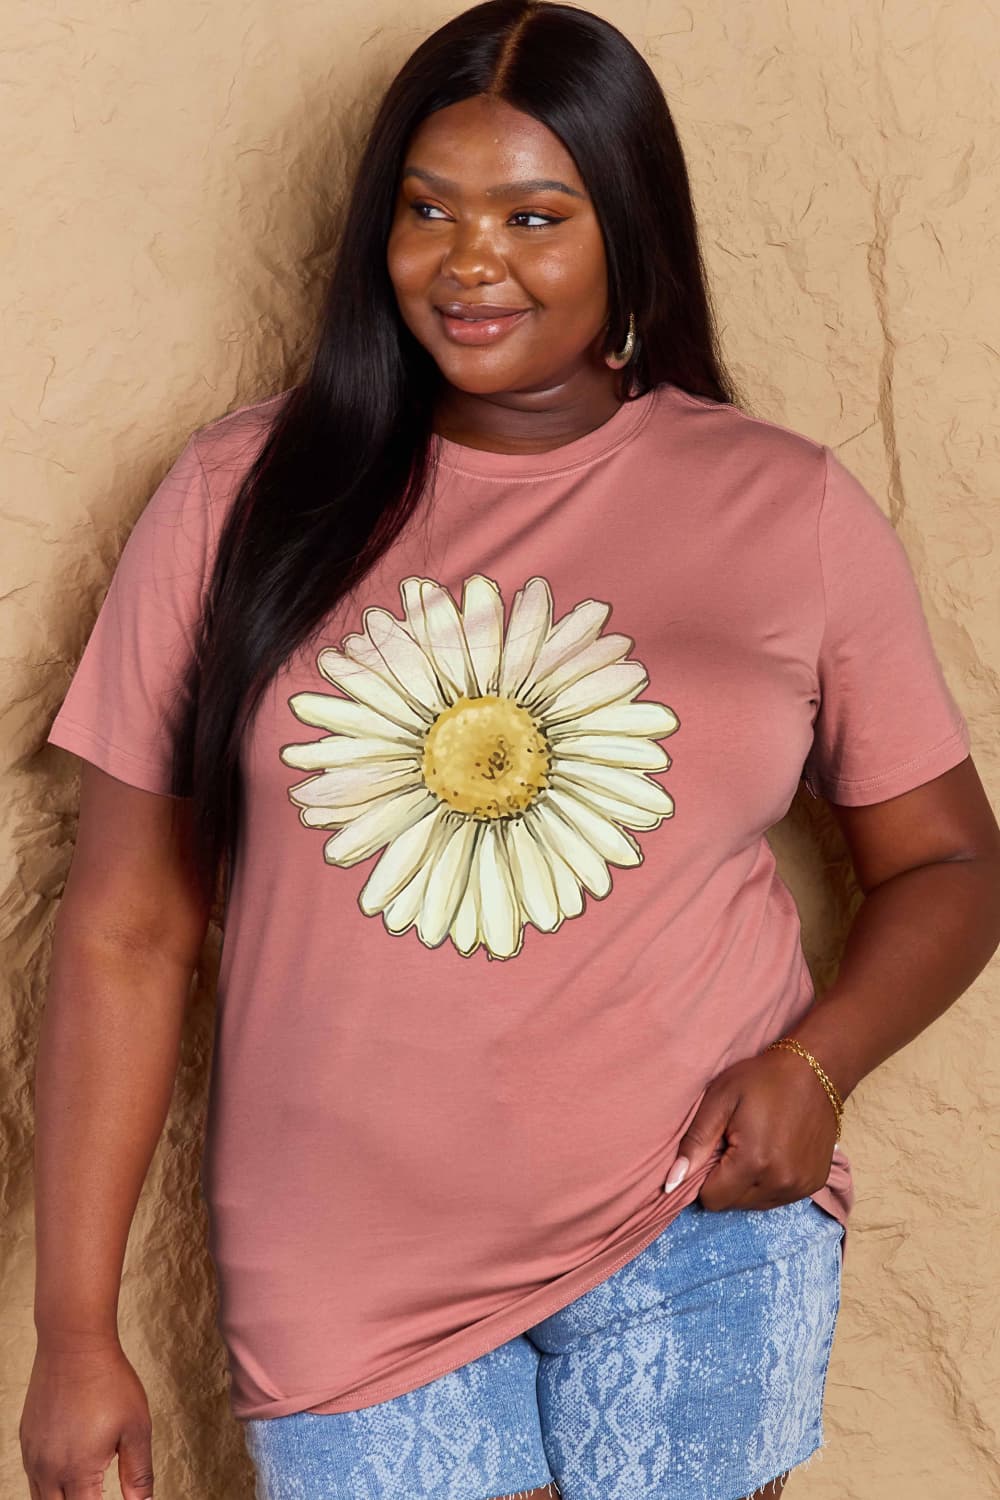 Malibu Dreams Simply Love Full Size FLOWER Graphic Cotton Tee